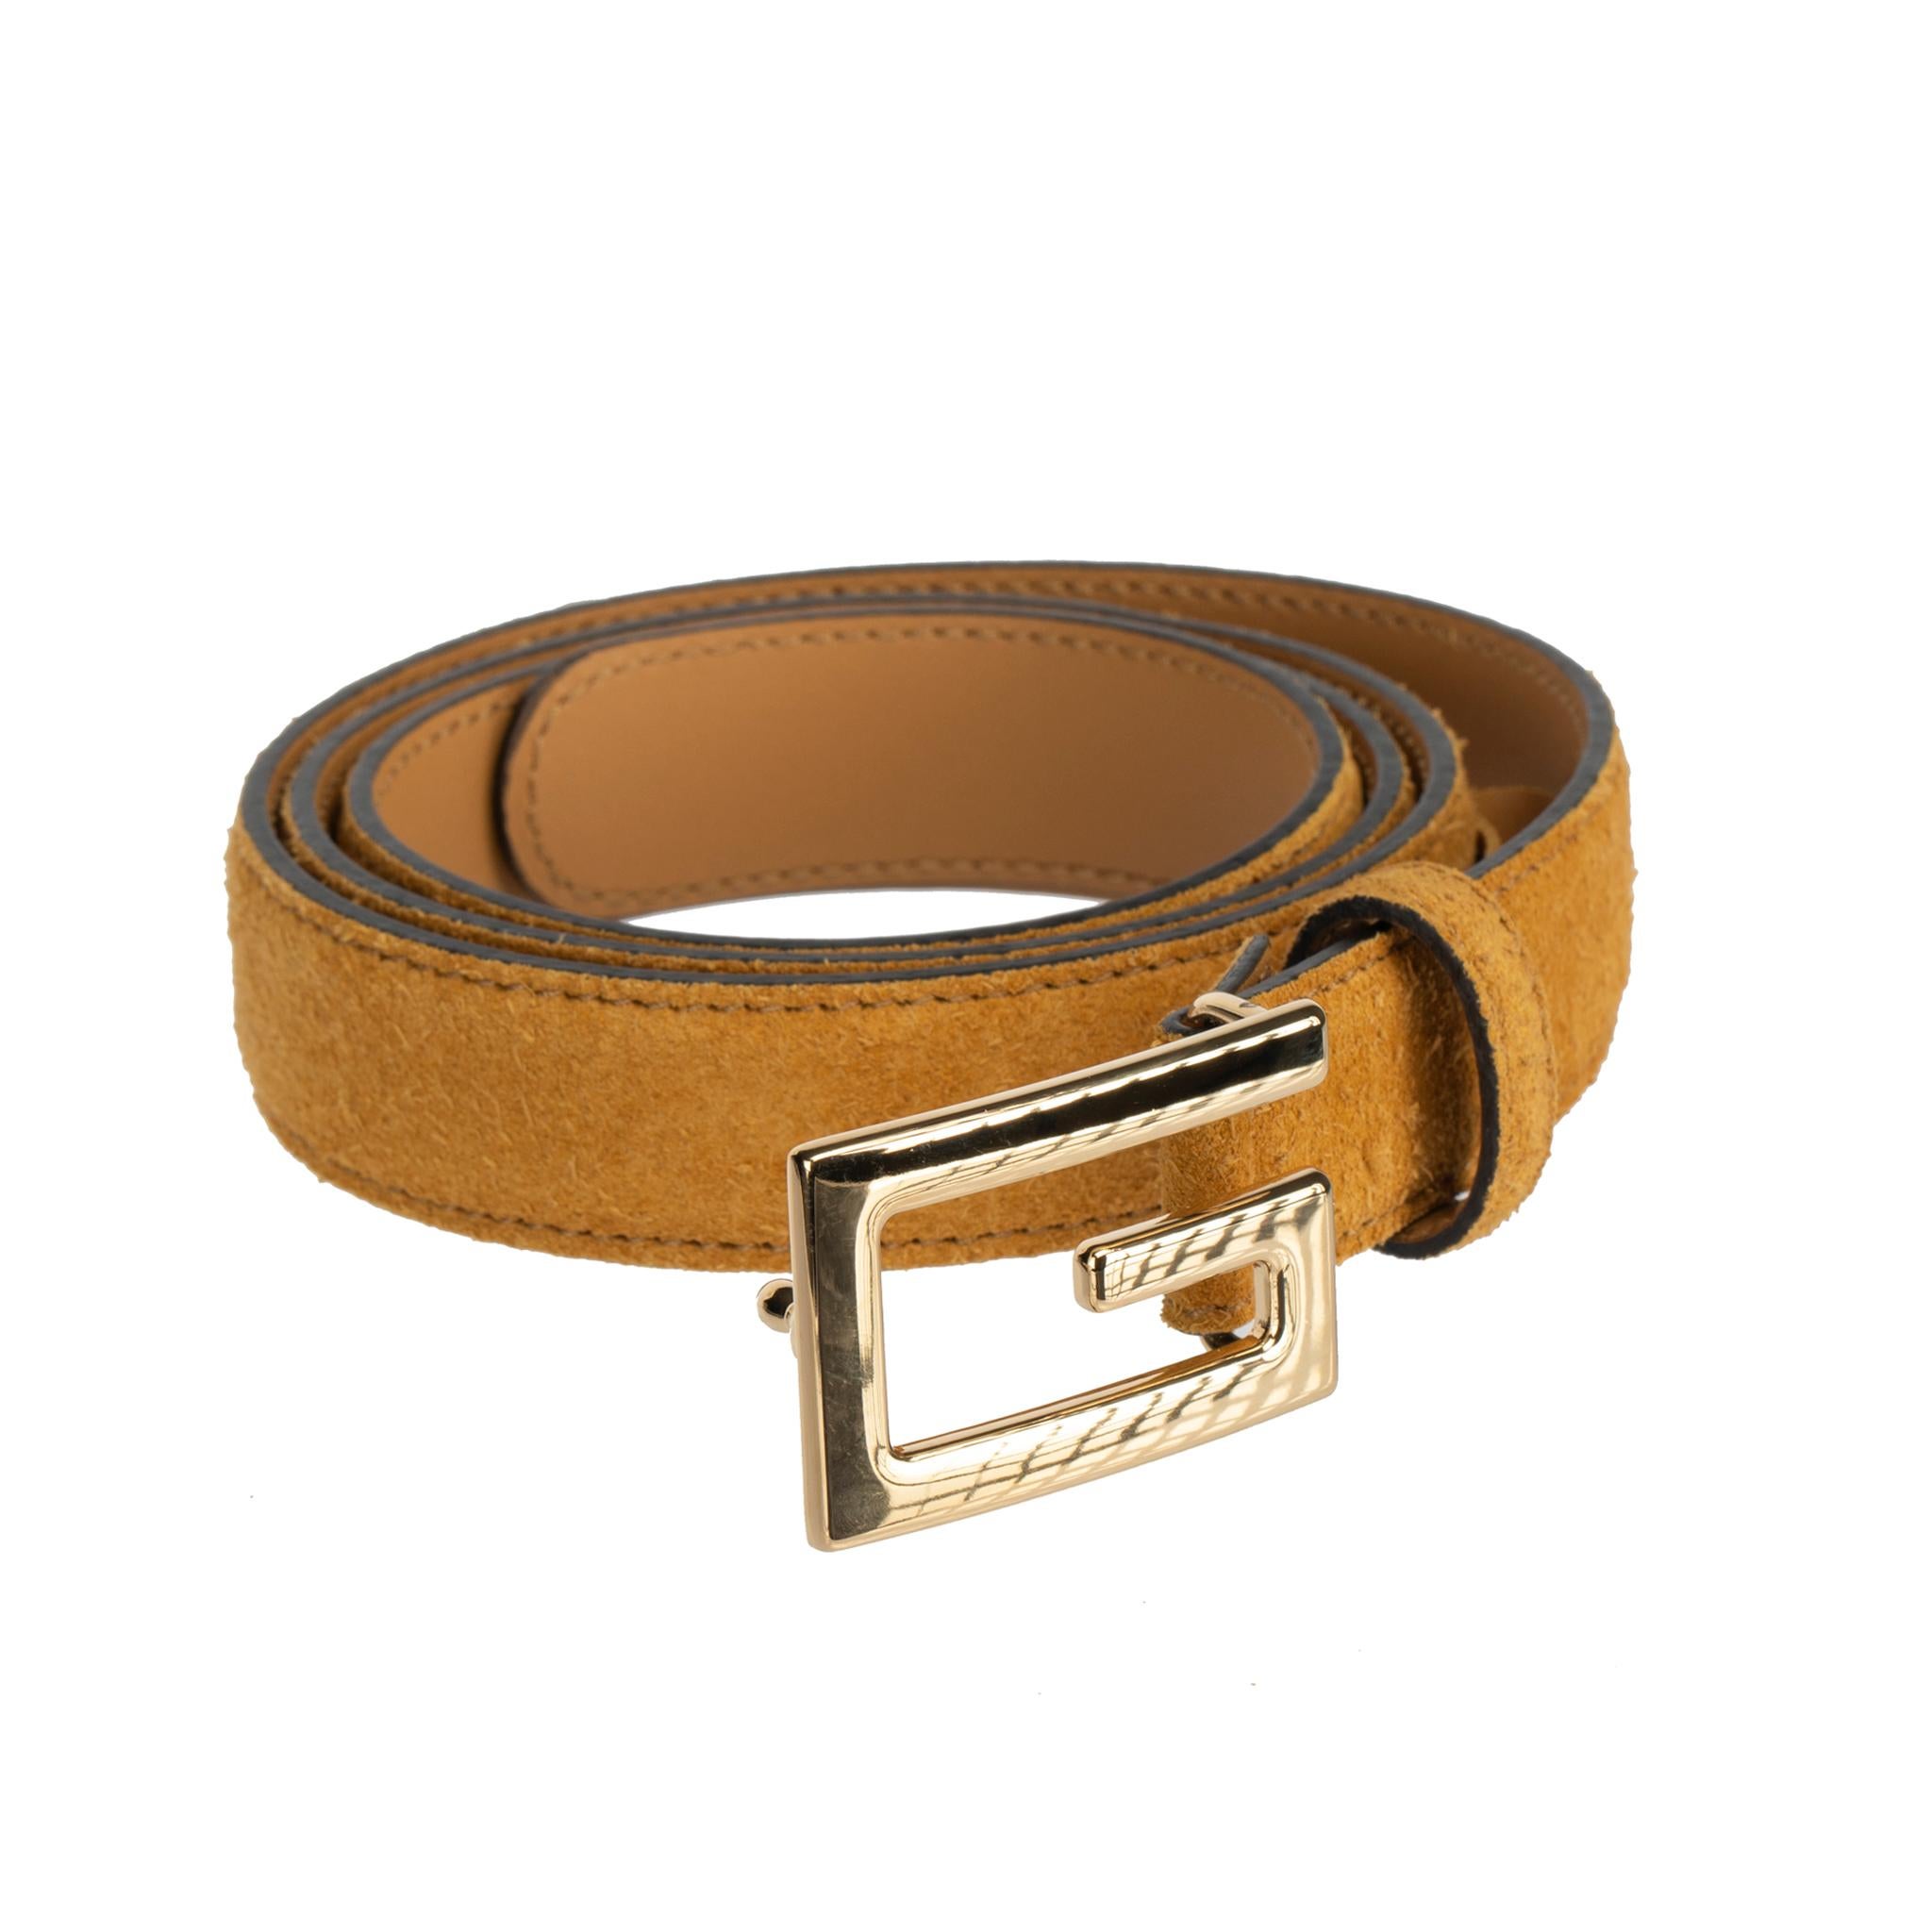 Brand:

Gucci

Product:

Icaro Belt

Size:

90 L X 2 H Cm

Colour:

Saffron

Material:

Suede & Smooth Leather

Hardware:

Aged Gold-Tone

Condition:

Pristine; New Or Never Worn

Accompanied By:

Gucci Dustbag
